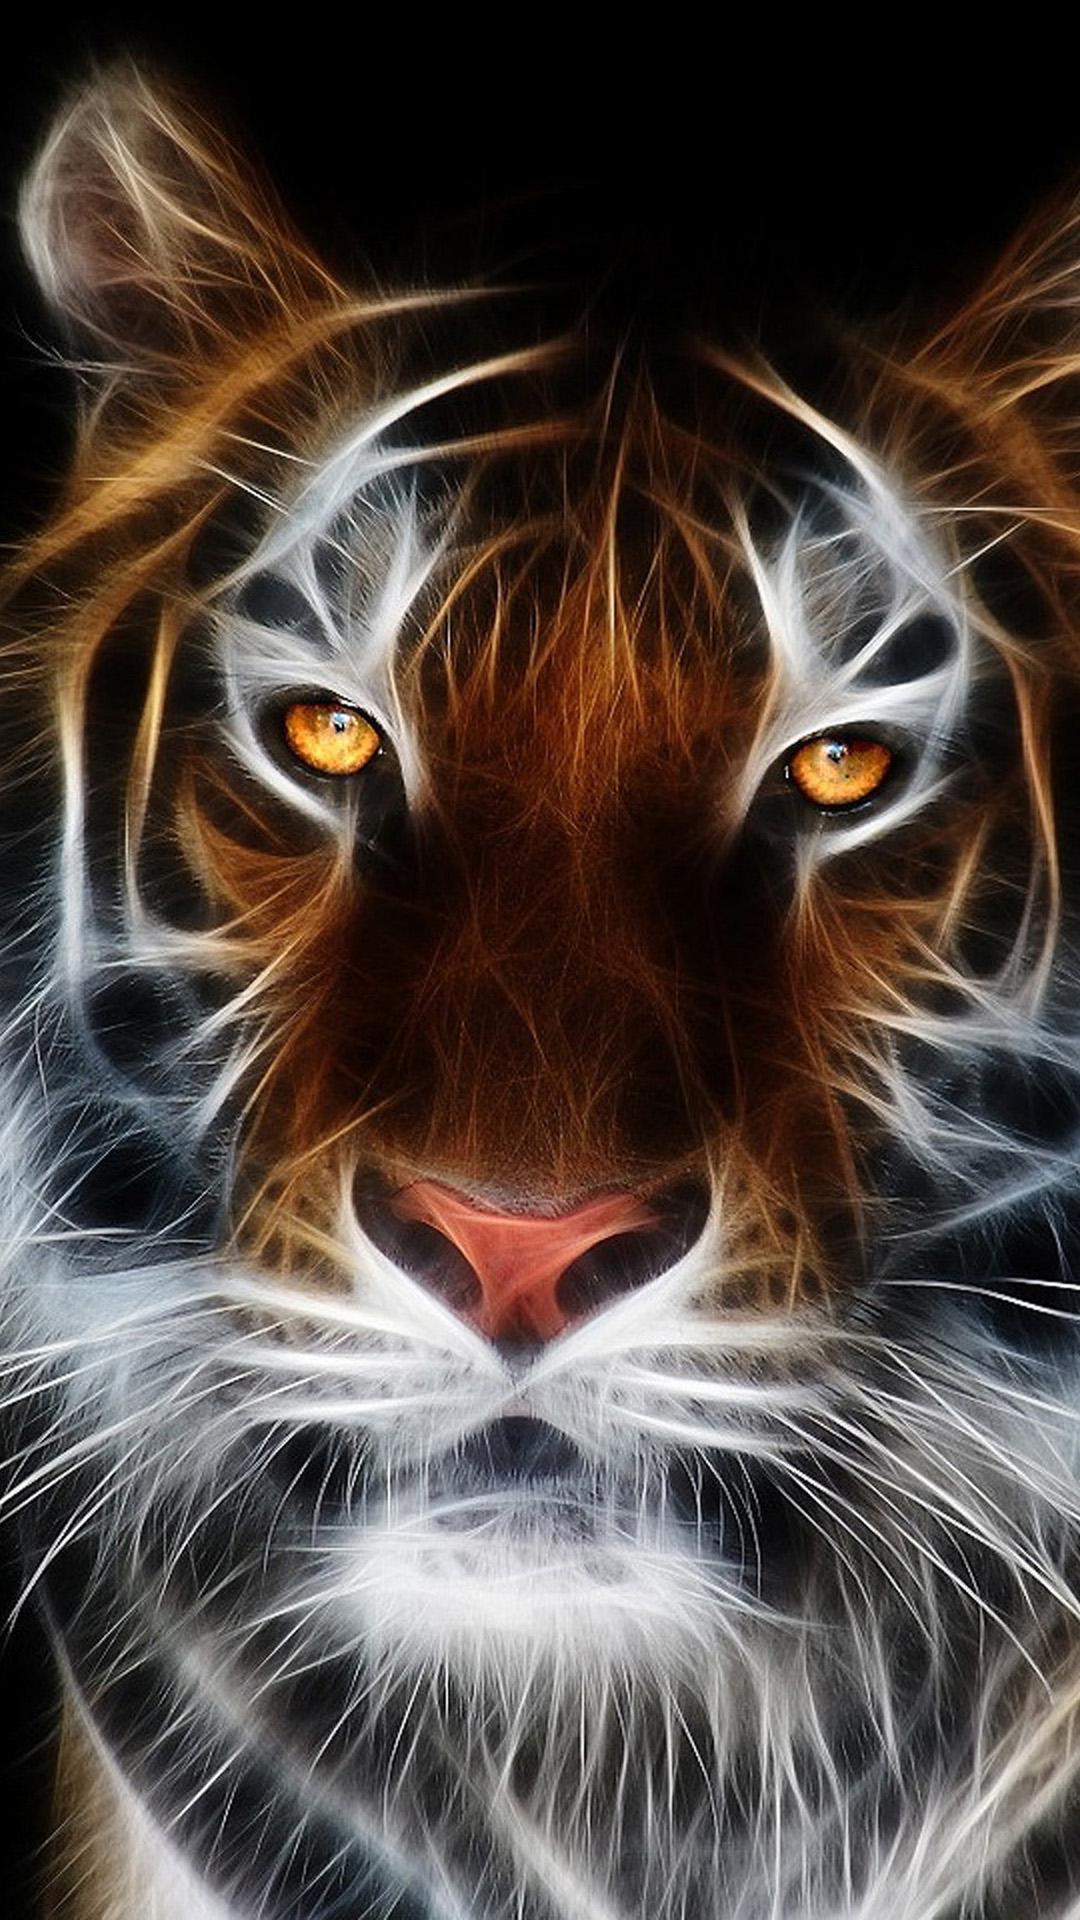 Cool Colorful Animal Wallpapers - Top Free Cool Colorful Animal